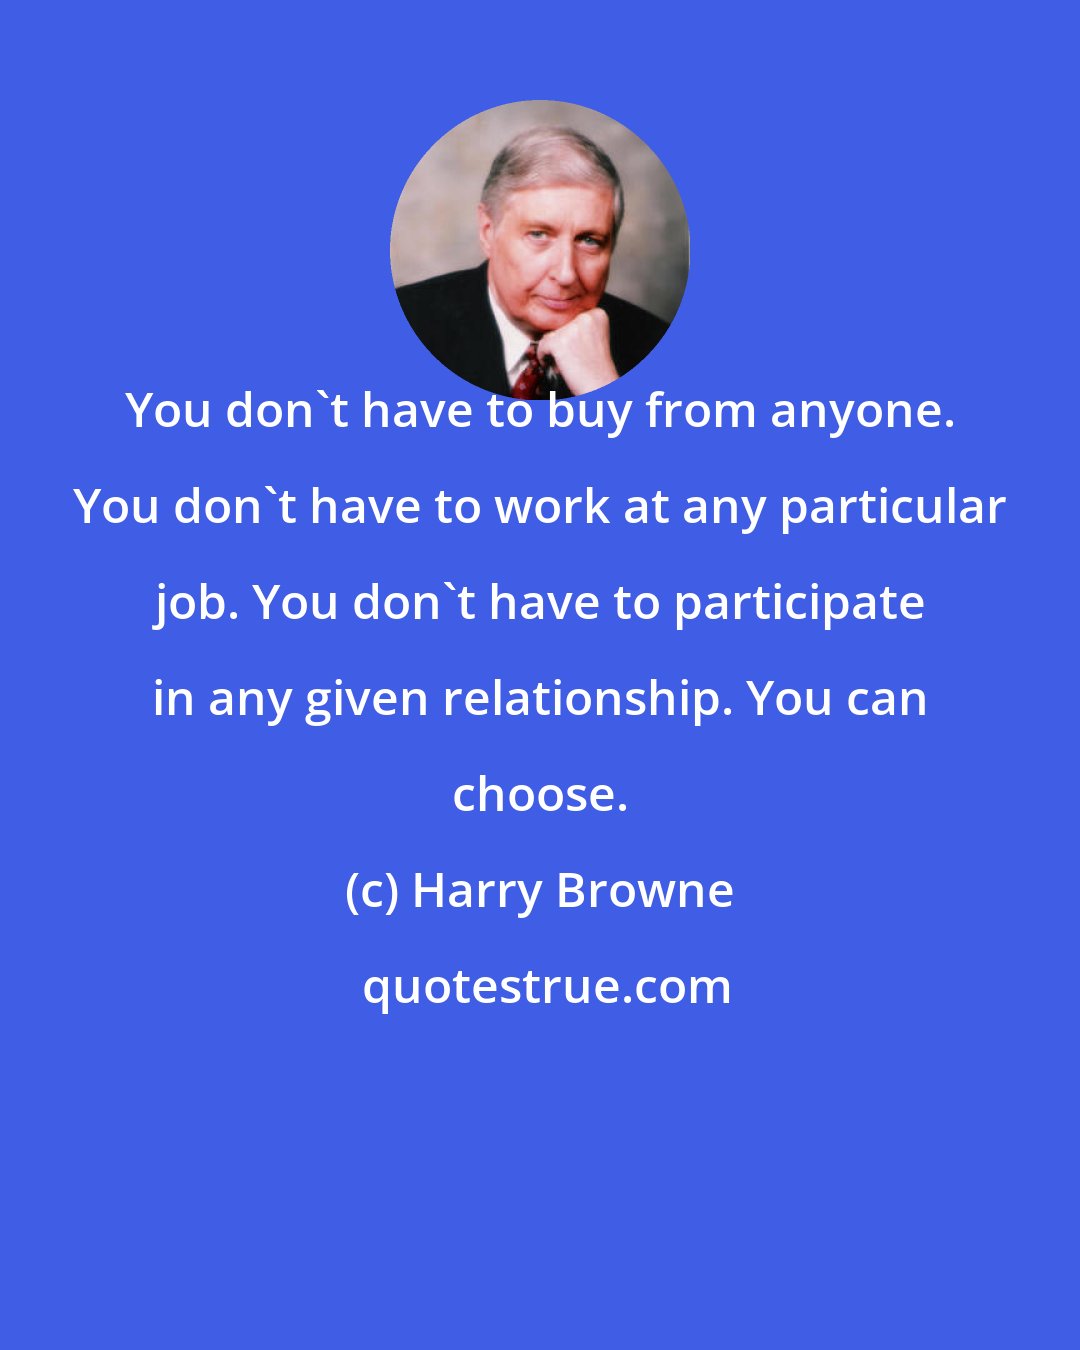 Harry Browne: You don't have to buy from anyone. You don't have to work at any particular job. You don't have to participate in any given relationship. You can choose.